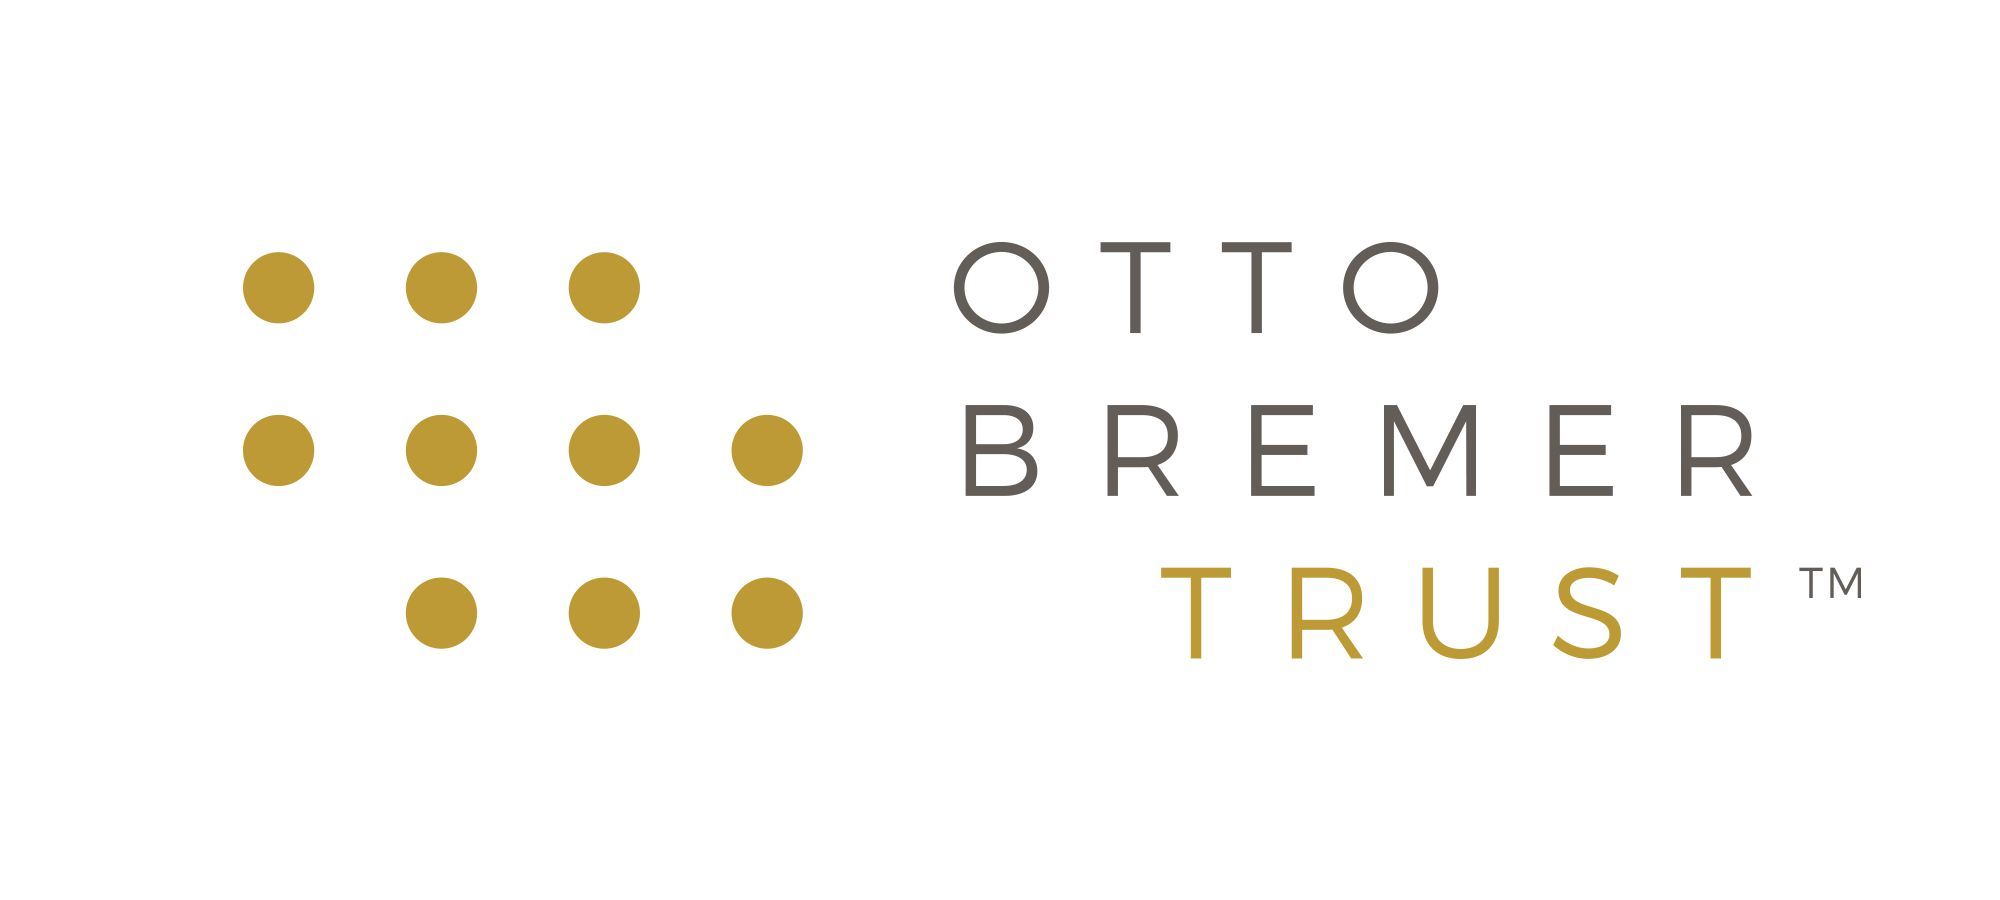 Otto Bremer Trust includes Reach Out and Read MN among grantees